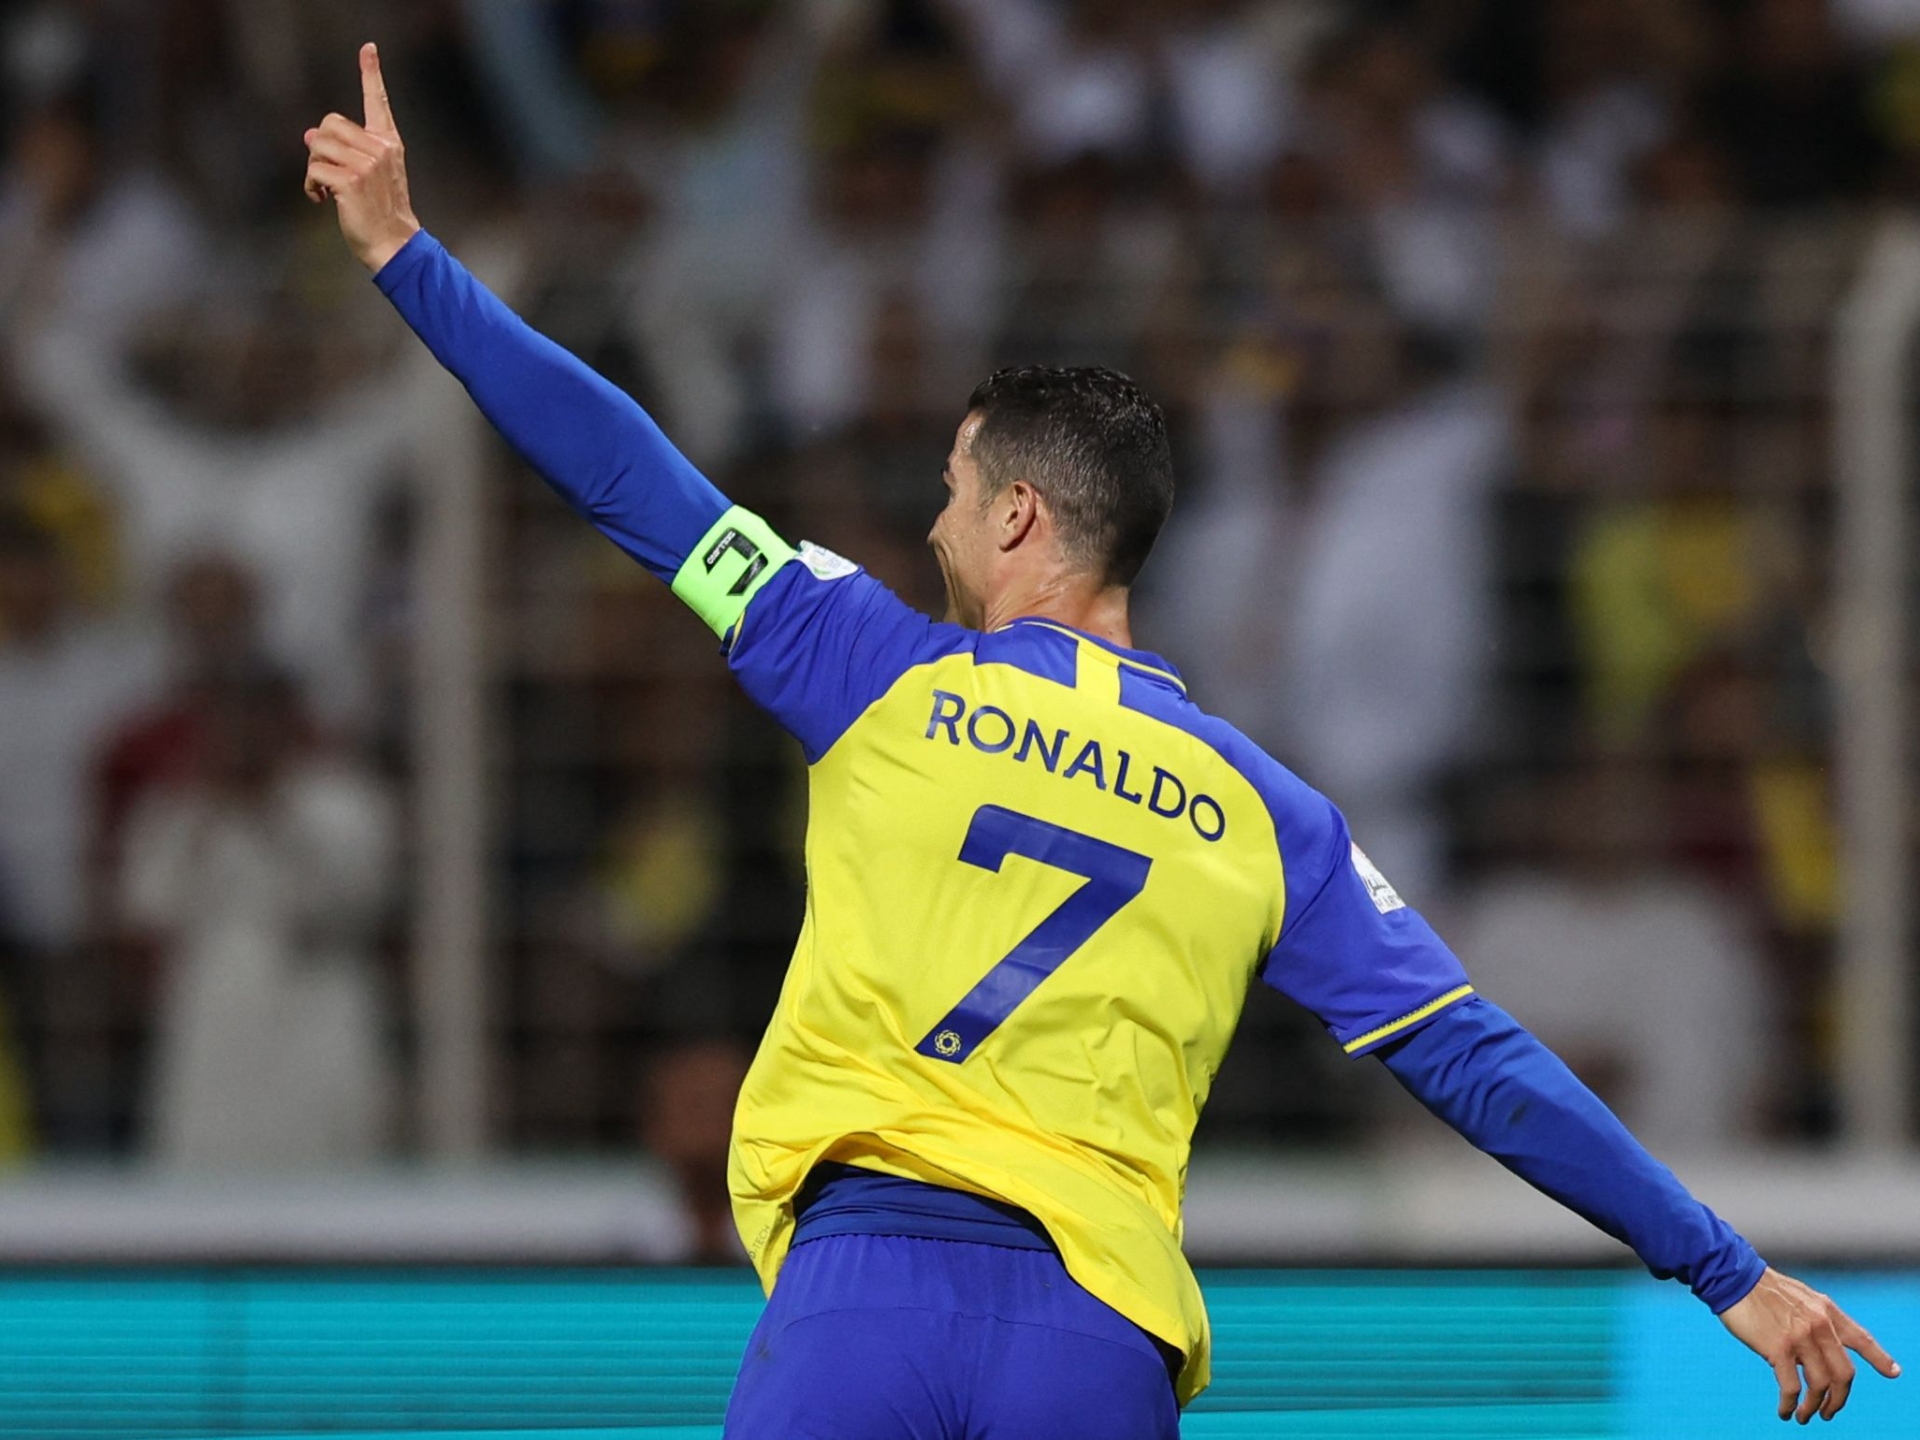 Not Bad For A 38 Year Old' Morgan Among Those To Congratulate Cristiano Ronaldo Who Scores Four Goals For Al Nassr To Bring Up 500th League Goal Of His Career